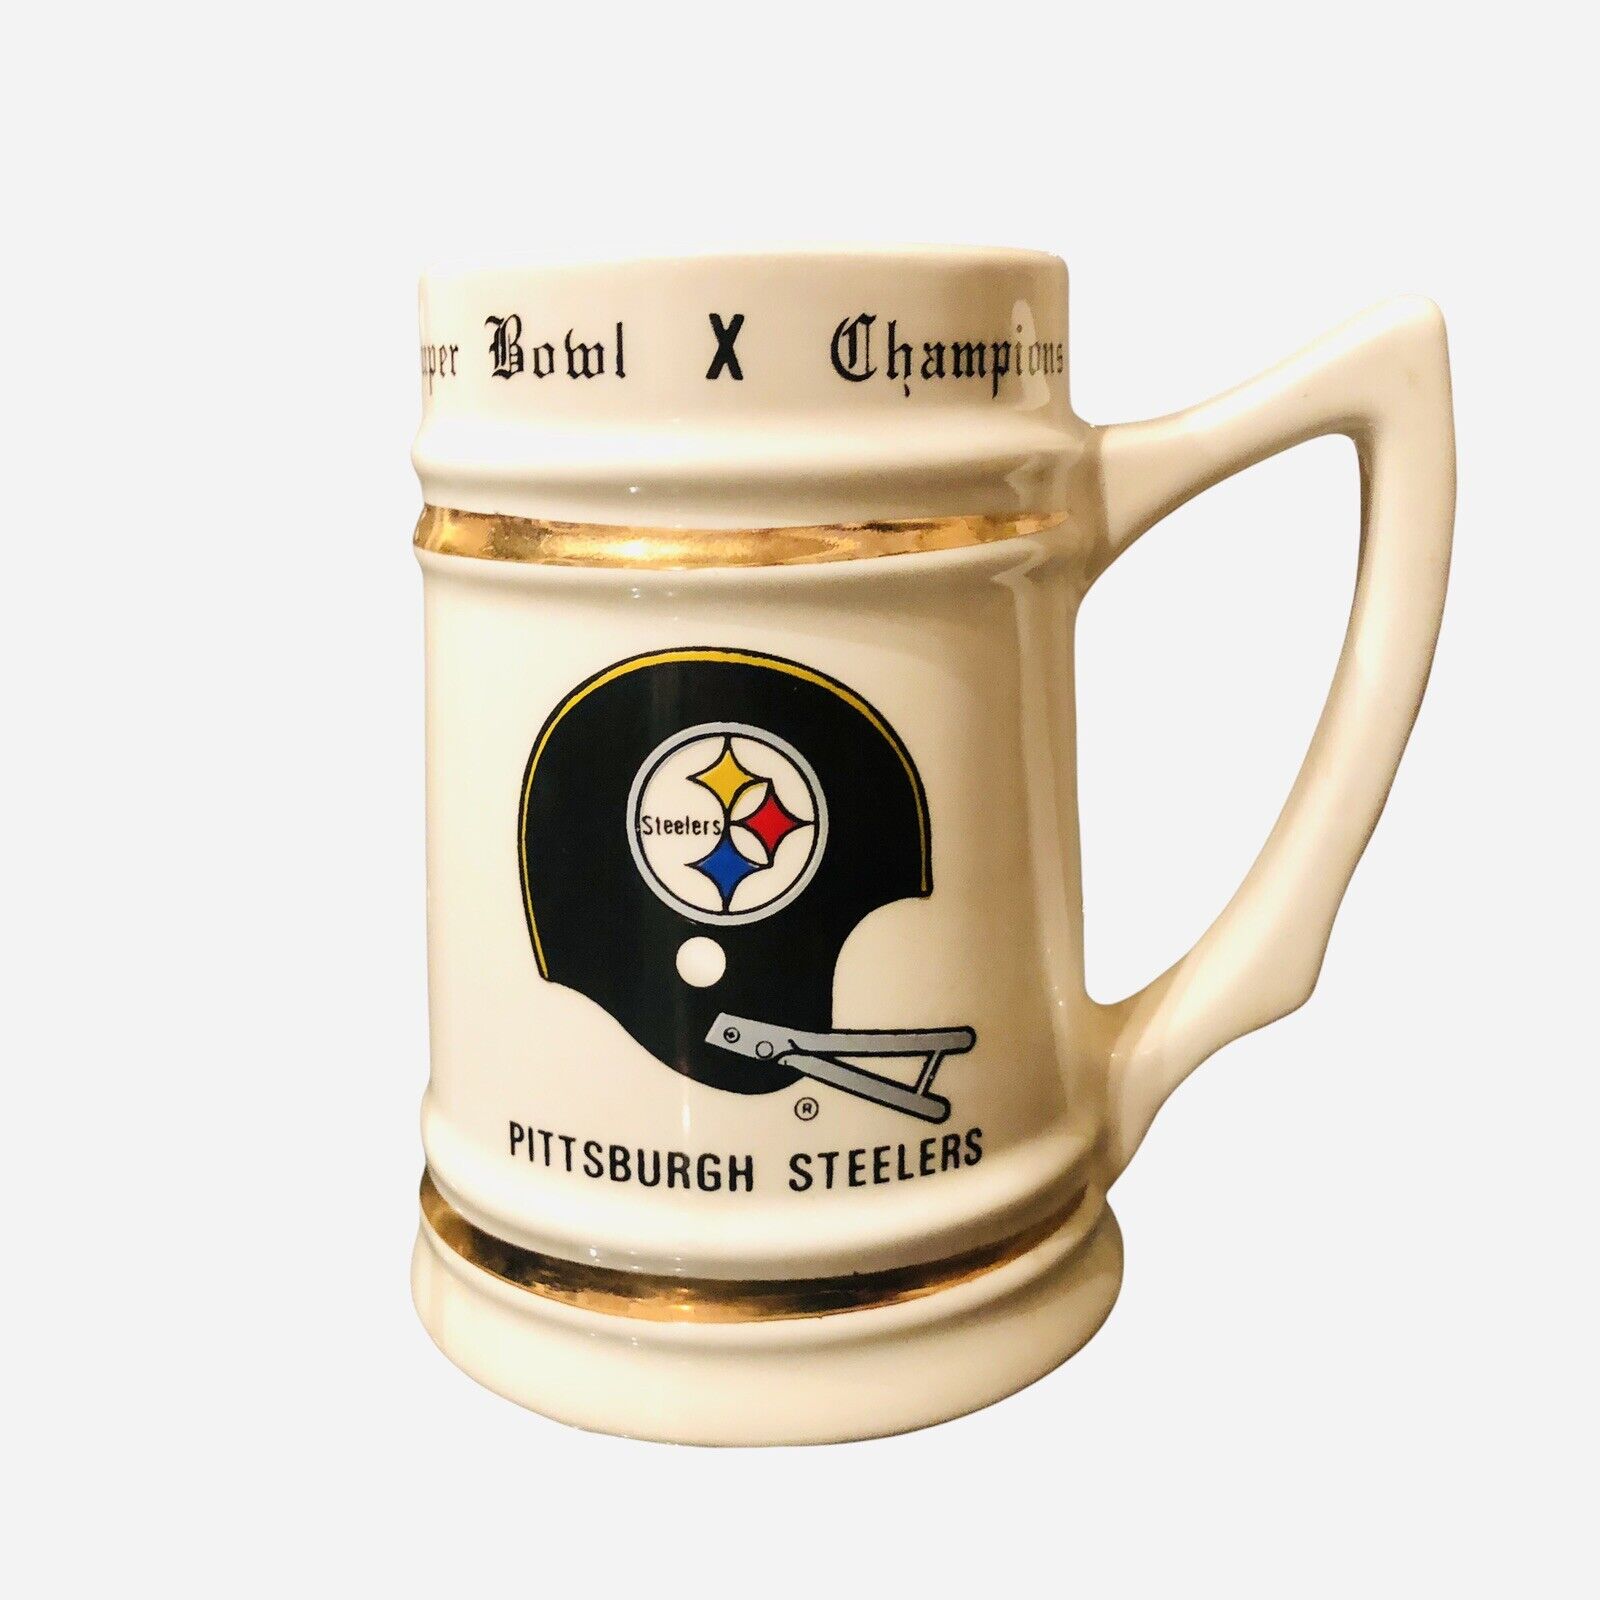 1975 PITTSBURGH STEELERS ~ Super Bowl X Champions ~ NFL Stein BE